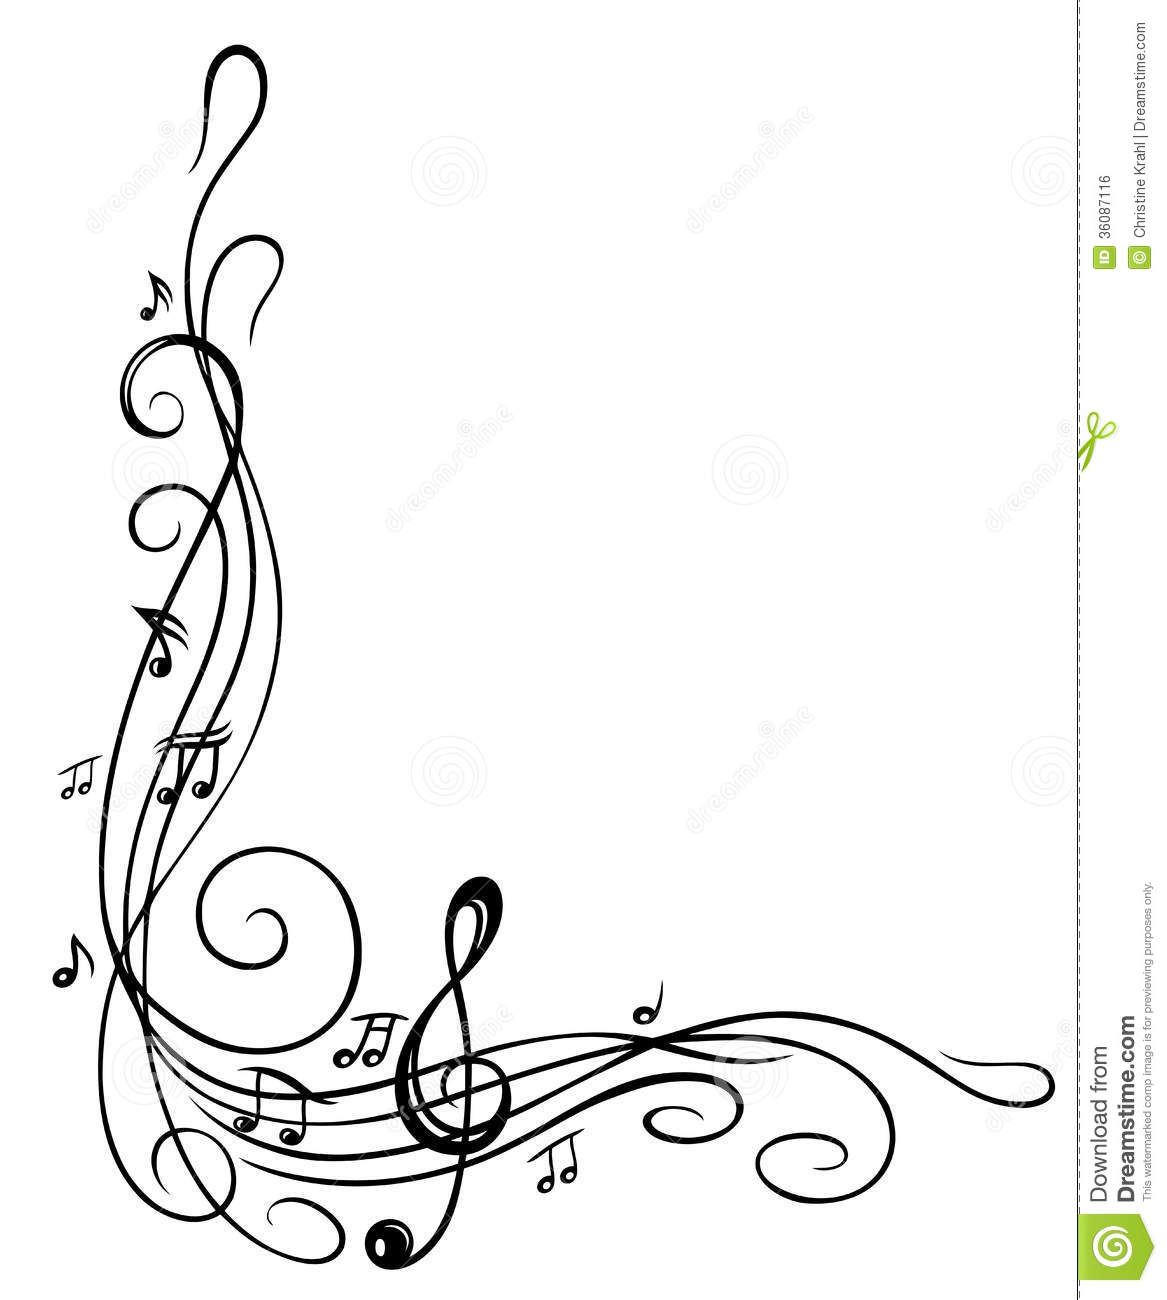 Music Notes Images Stock Photos Vectors Shutterstock